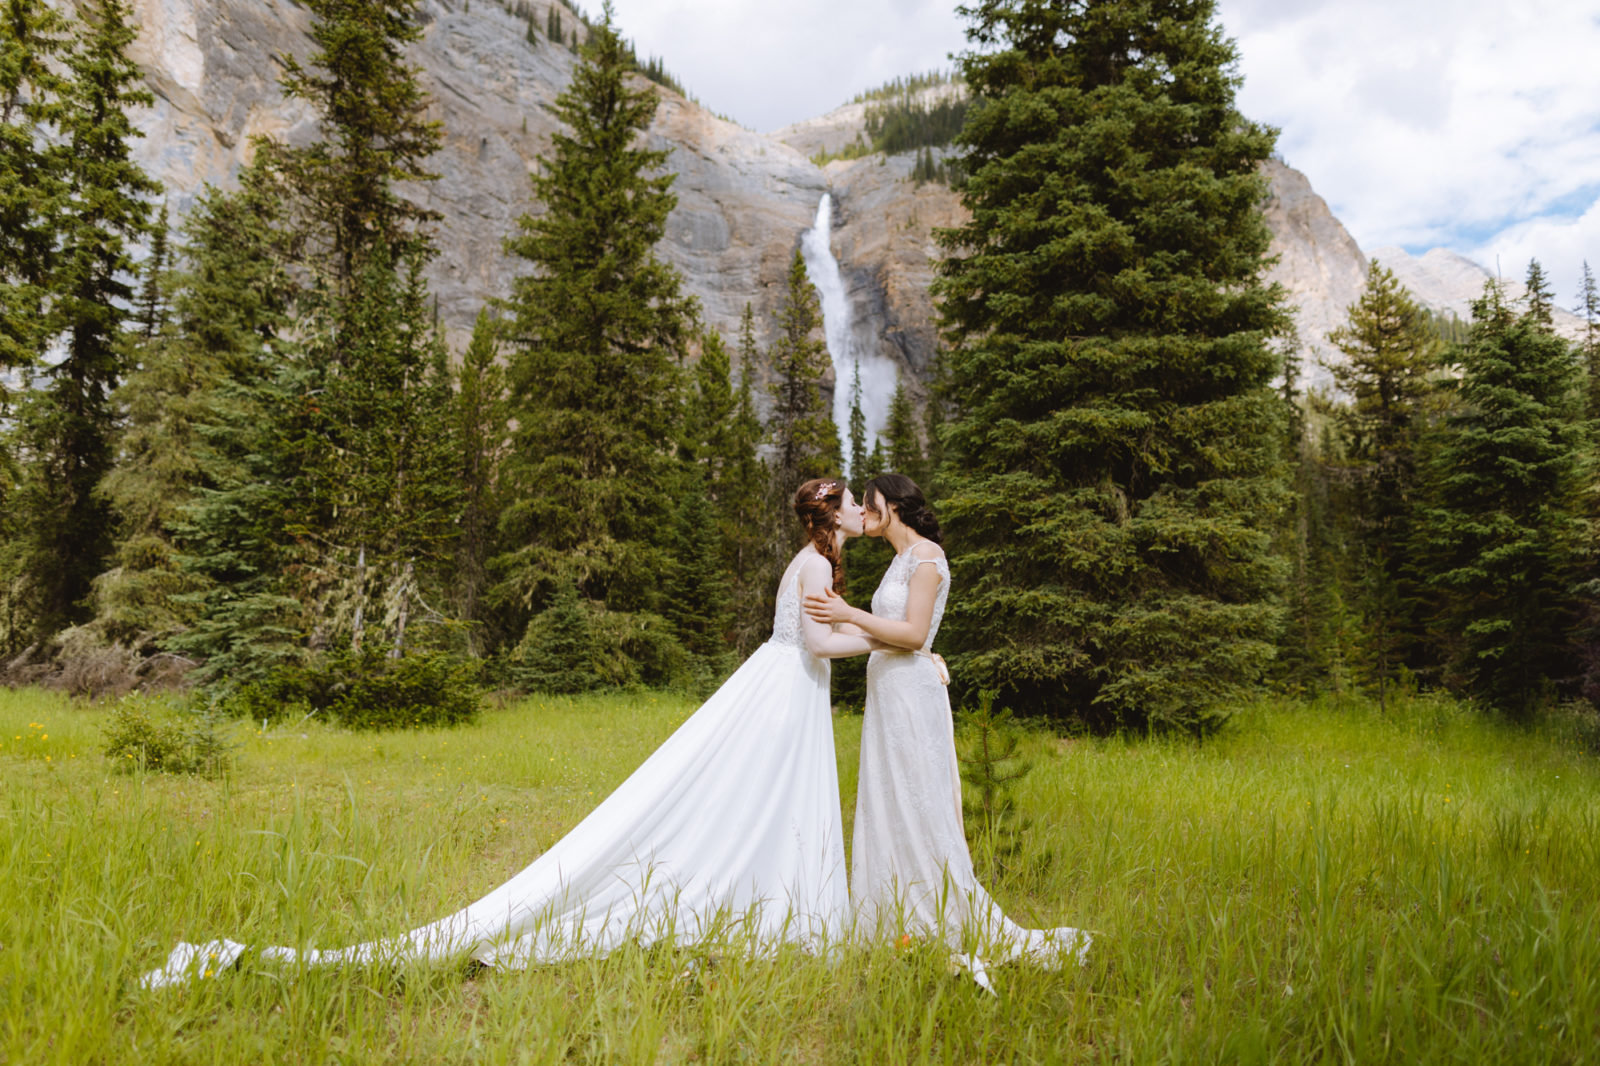 Newly weds share their first kiss in front of Takakkaw Falls for this Elopement in Yoho National Park